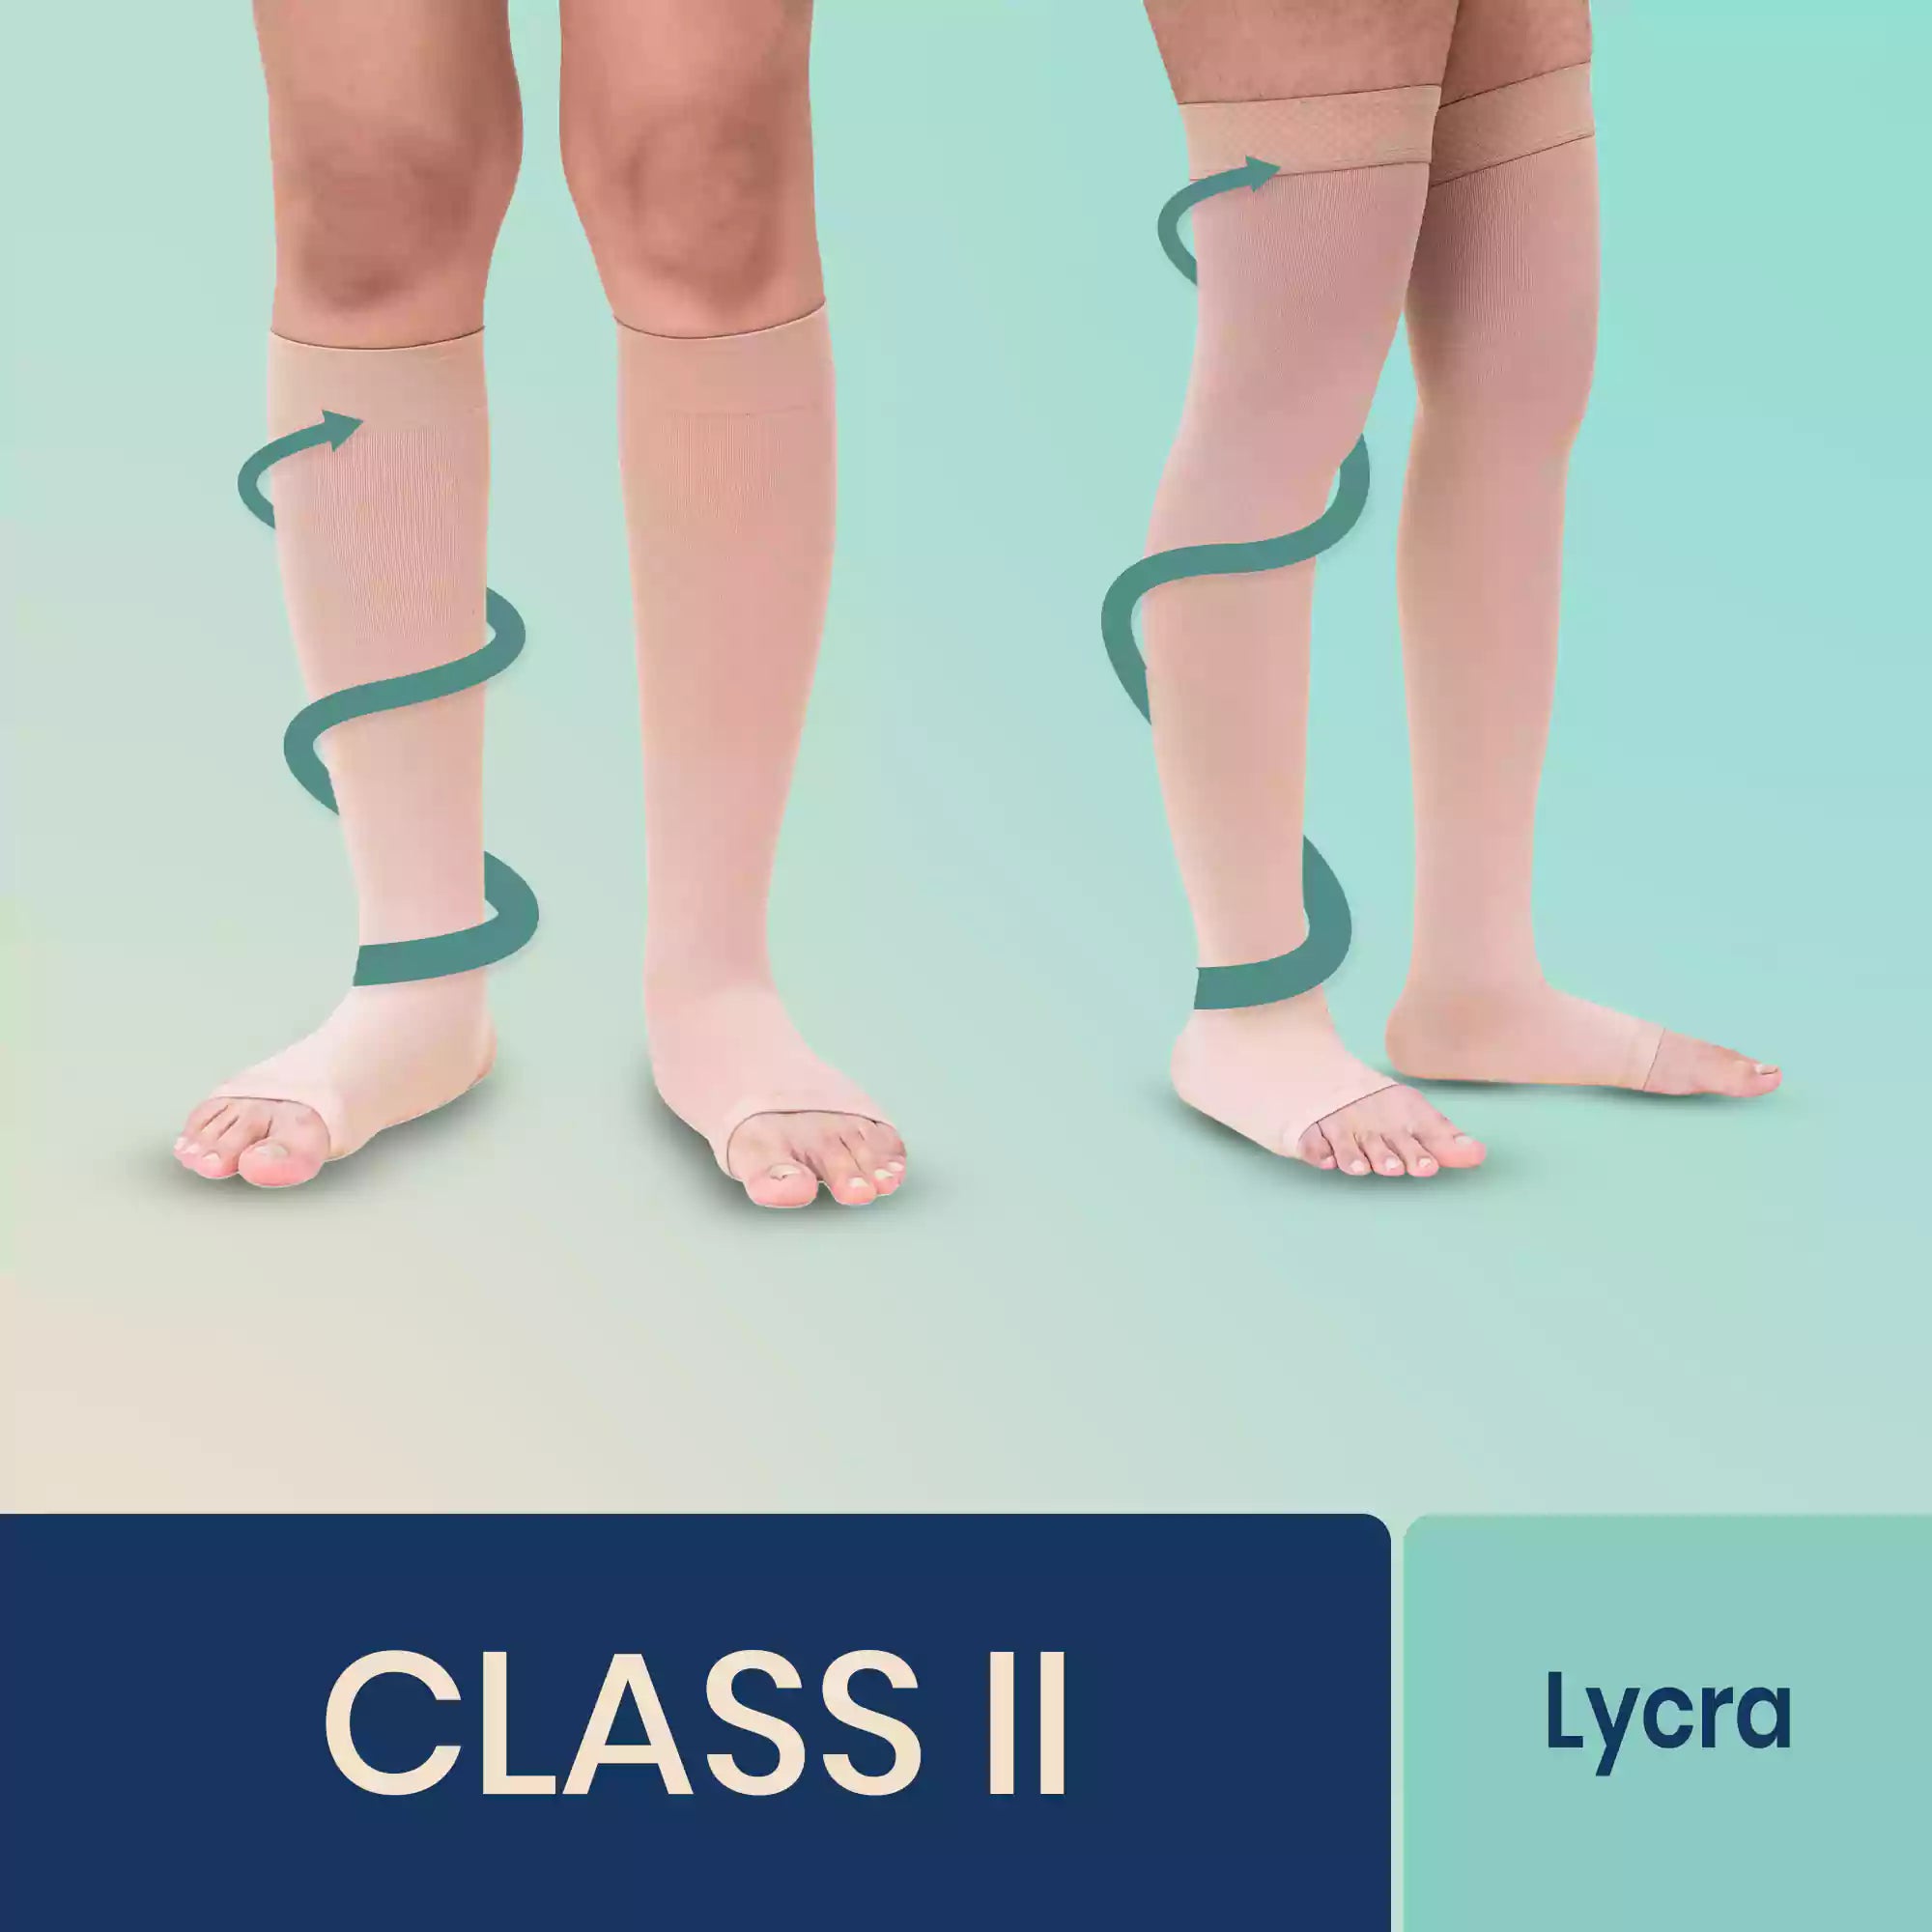 class 2 compression stockings - compression stockings for varicose veins